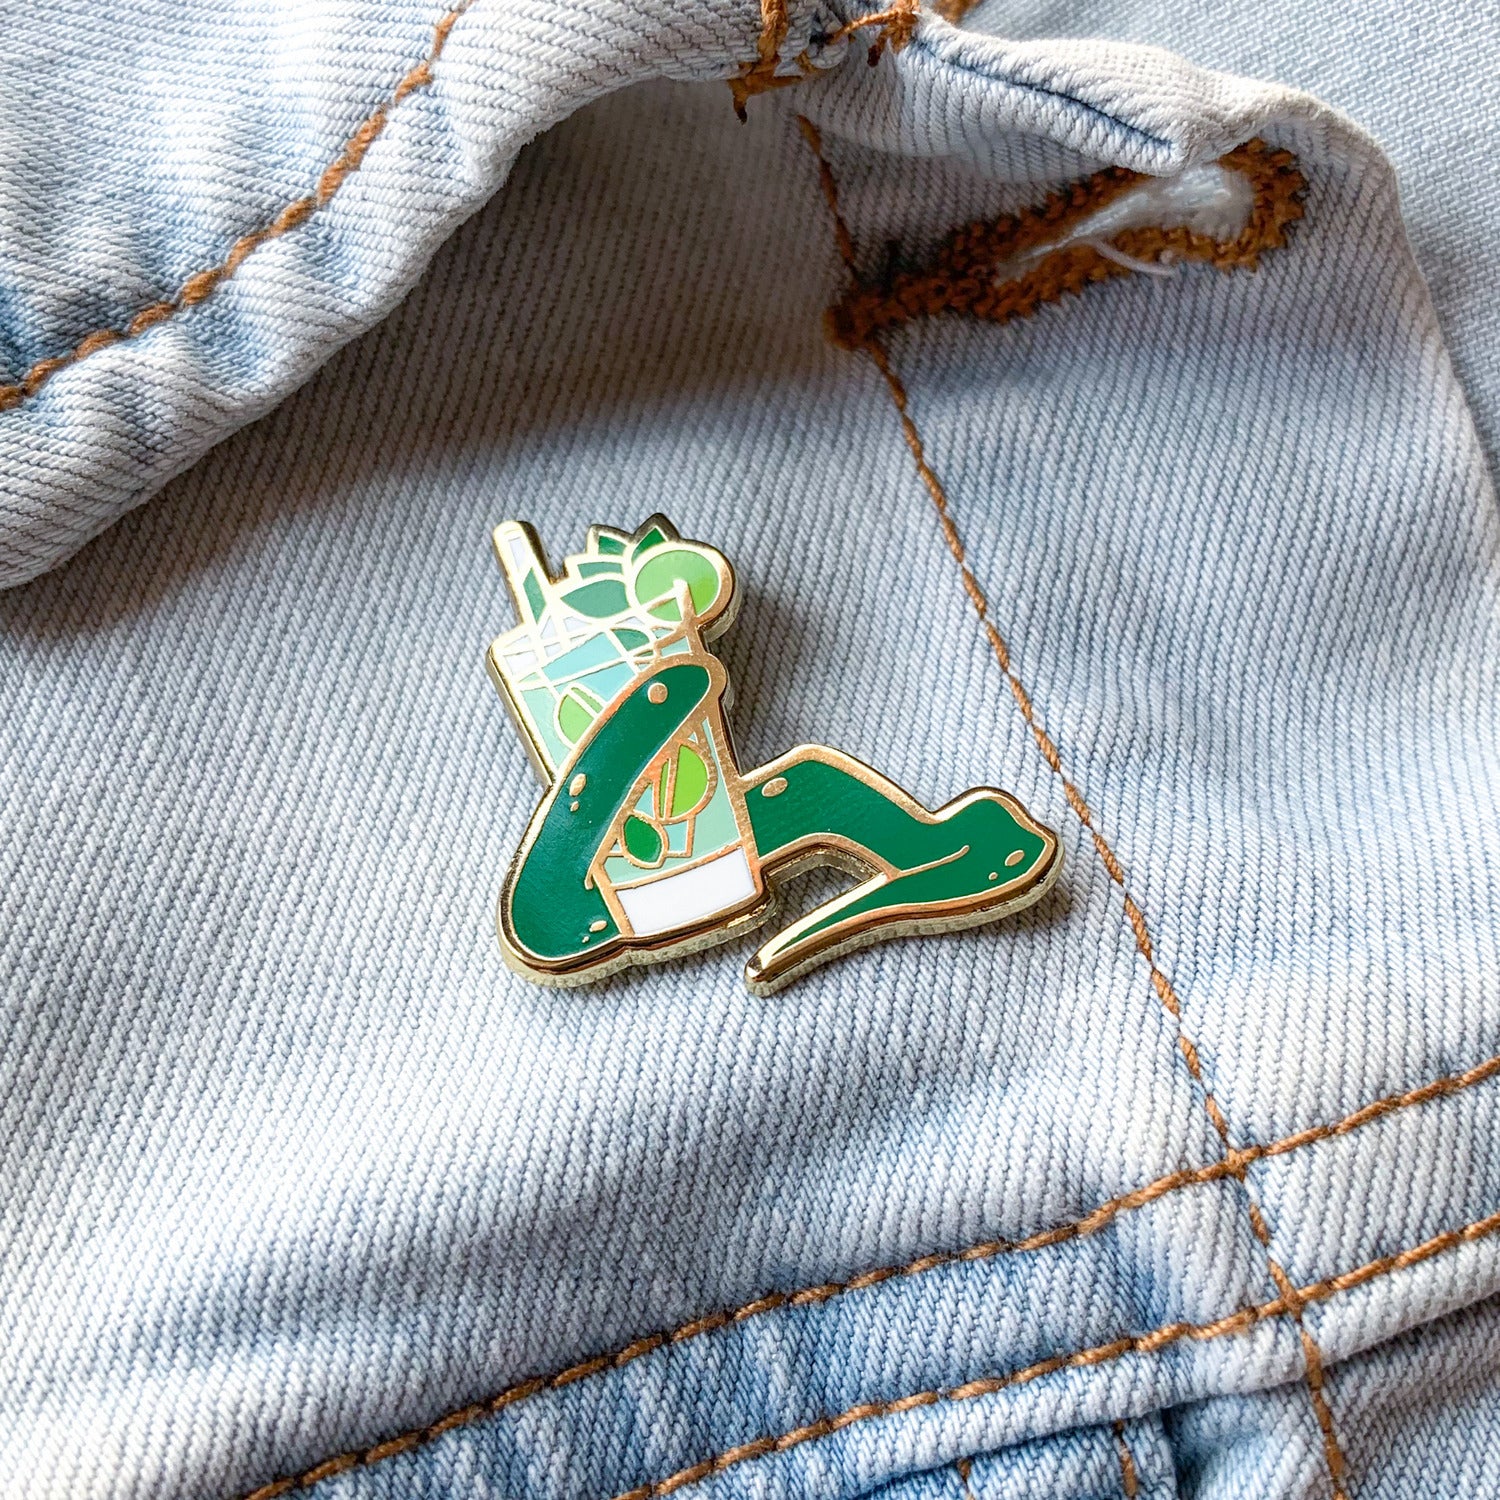 Snake and Mojito Cocktail Hard Enamel Pin by Cocktail Critters on Denim